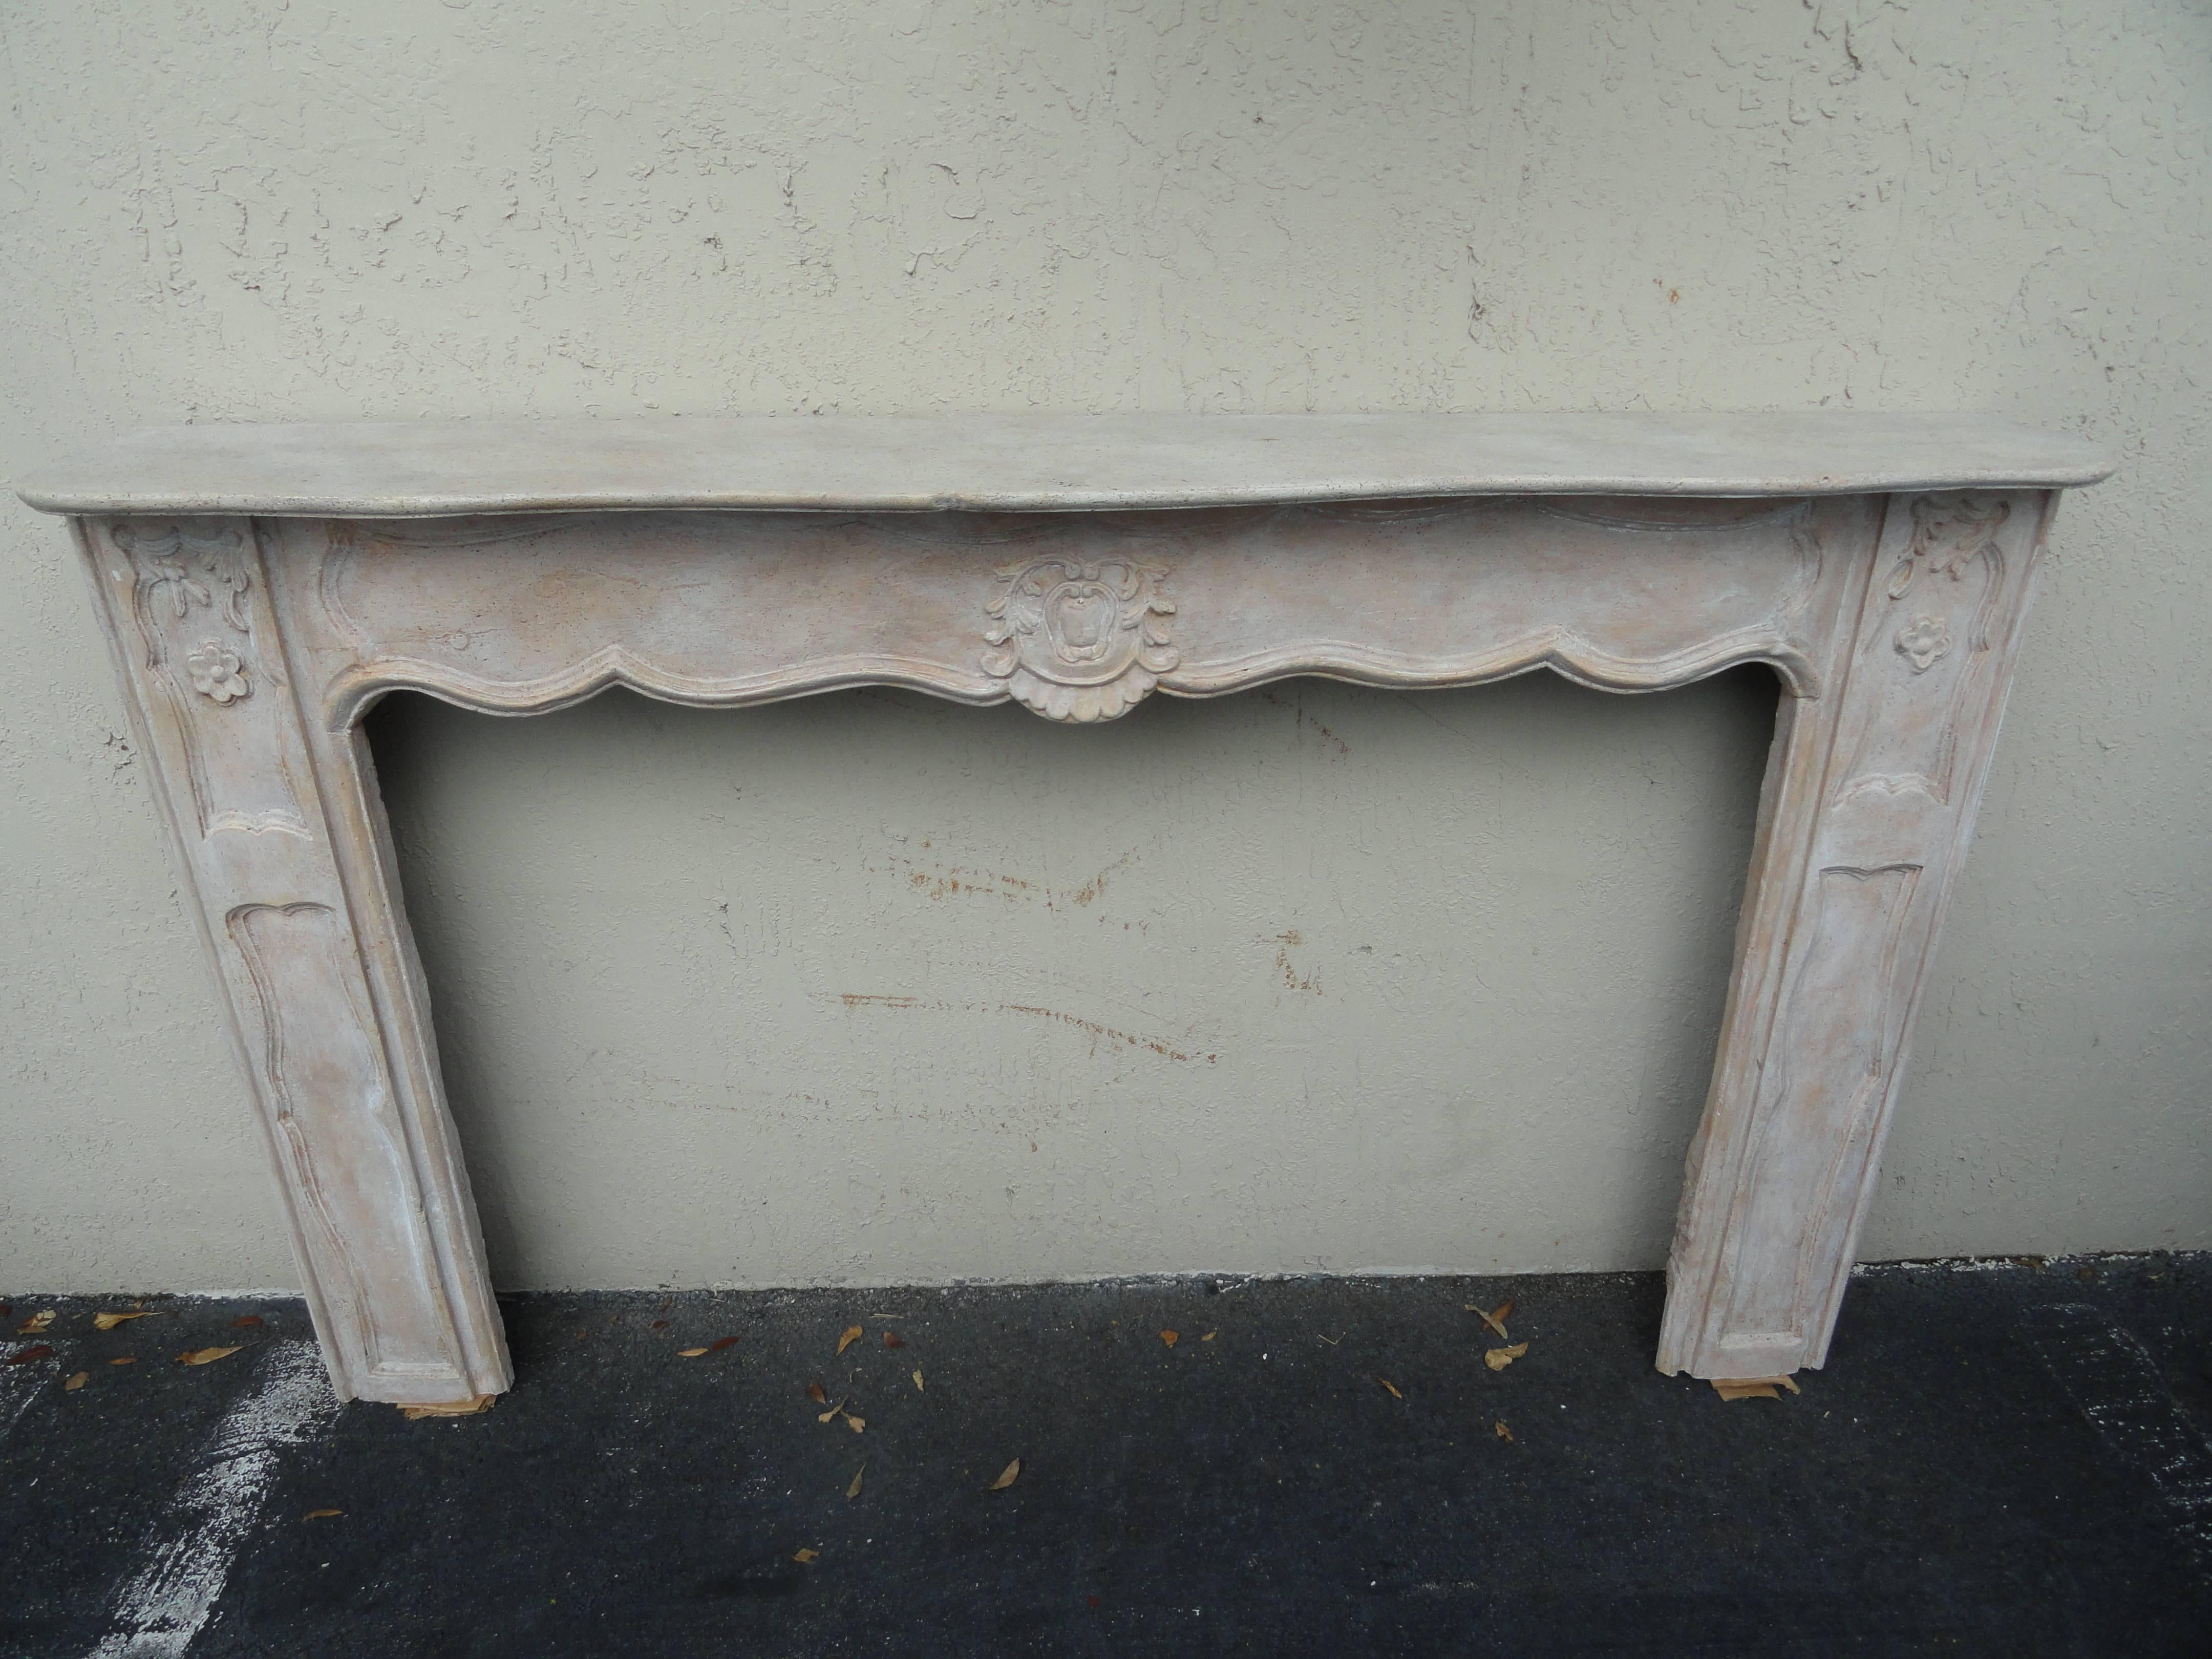 19th century French wood hand-carved fireplace surround. Walnut and oak. One piece, 20th century finish. Large-scale.
Outside dimensions 76.5